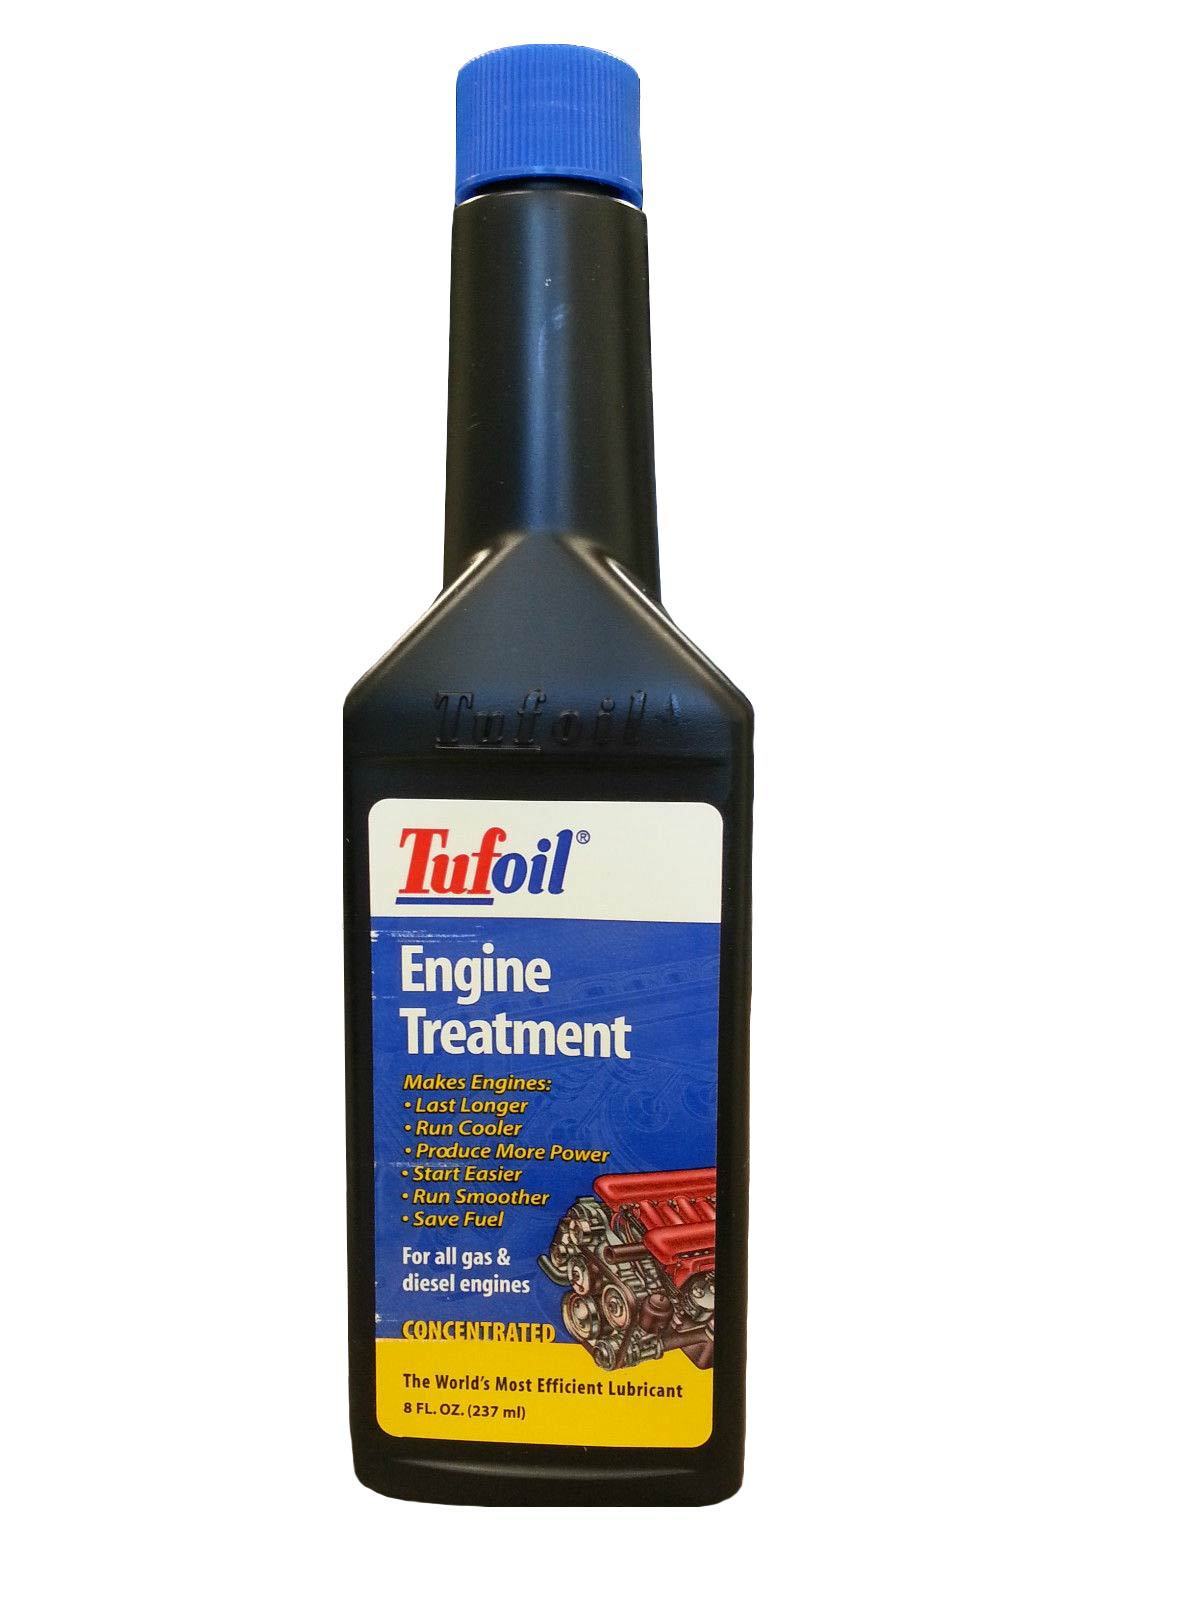 Tufoil Long Run Additive Lubricant Oil 8 Oz for All Diesel and Gas Engine 237 ml